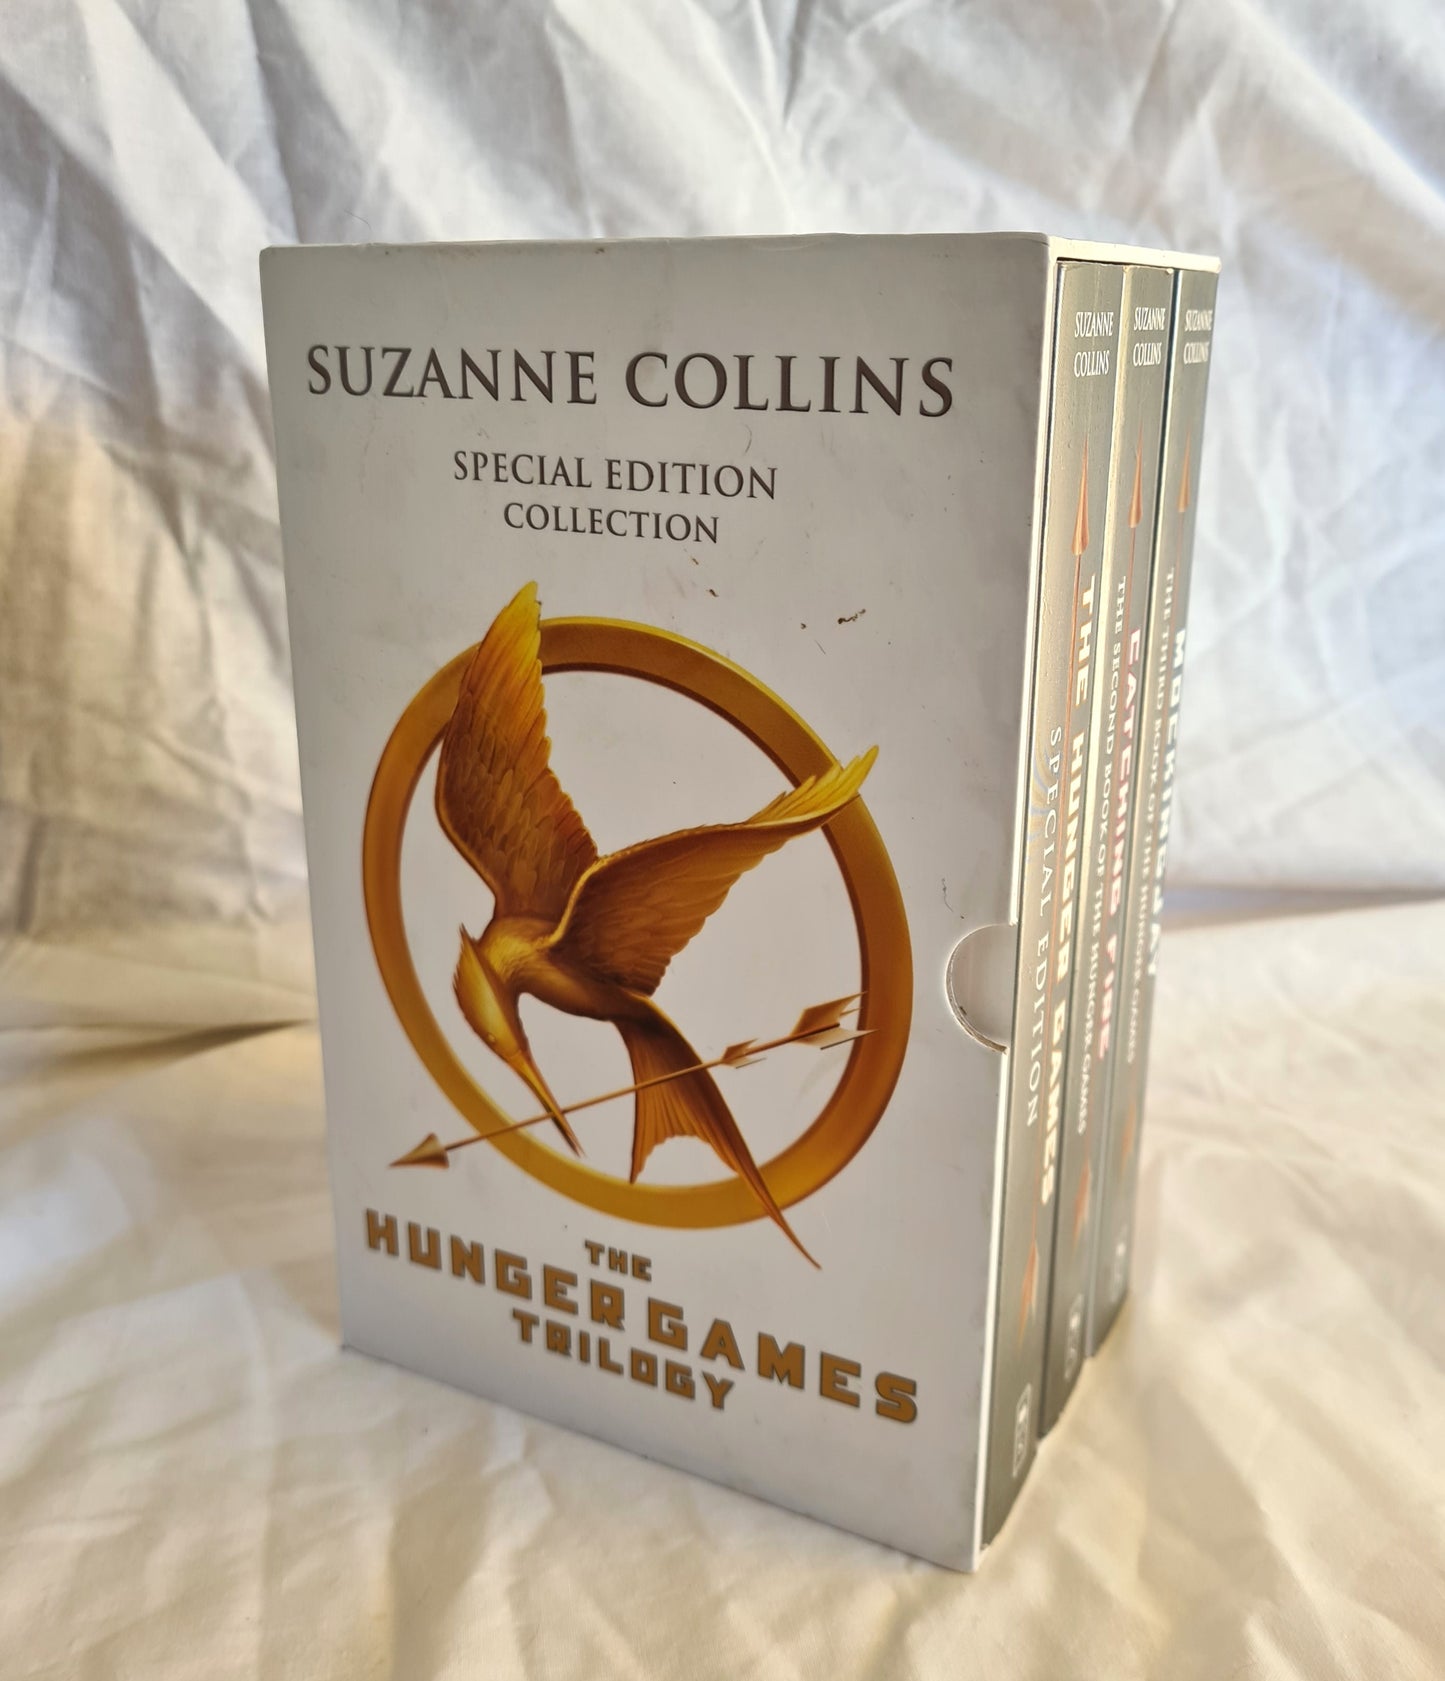 The Hunger Games Trilogy  by Suzanne Collins  Special Edition Collection